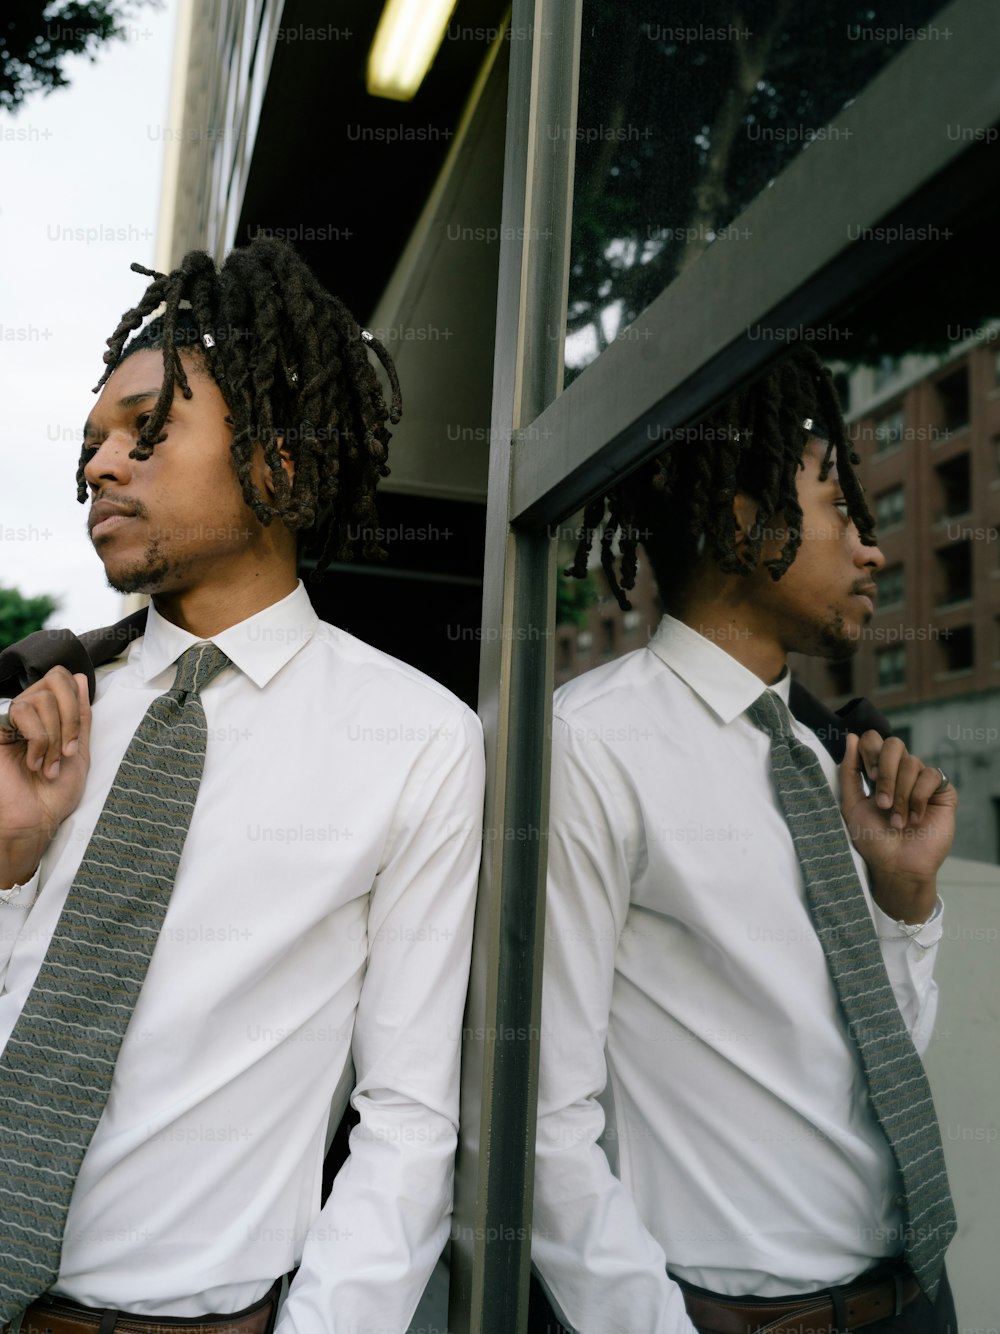 a man with dreadlocks and a tie